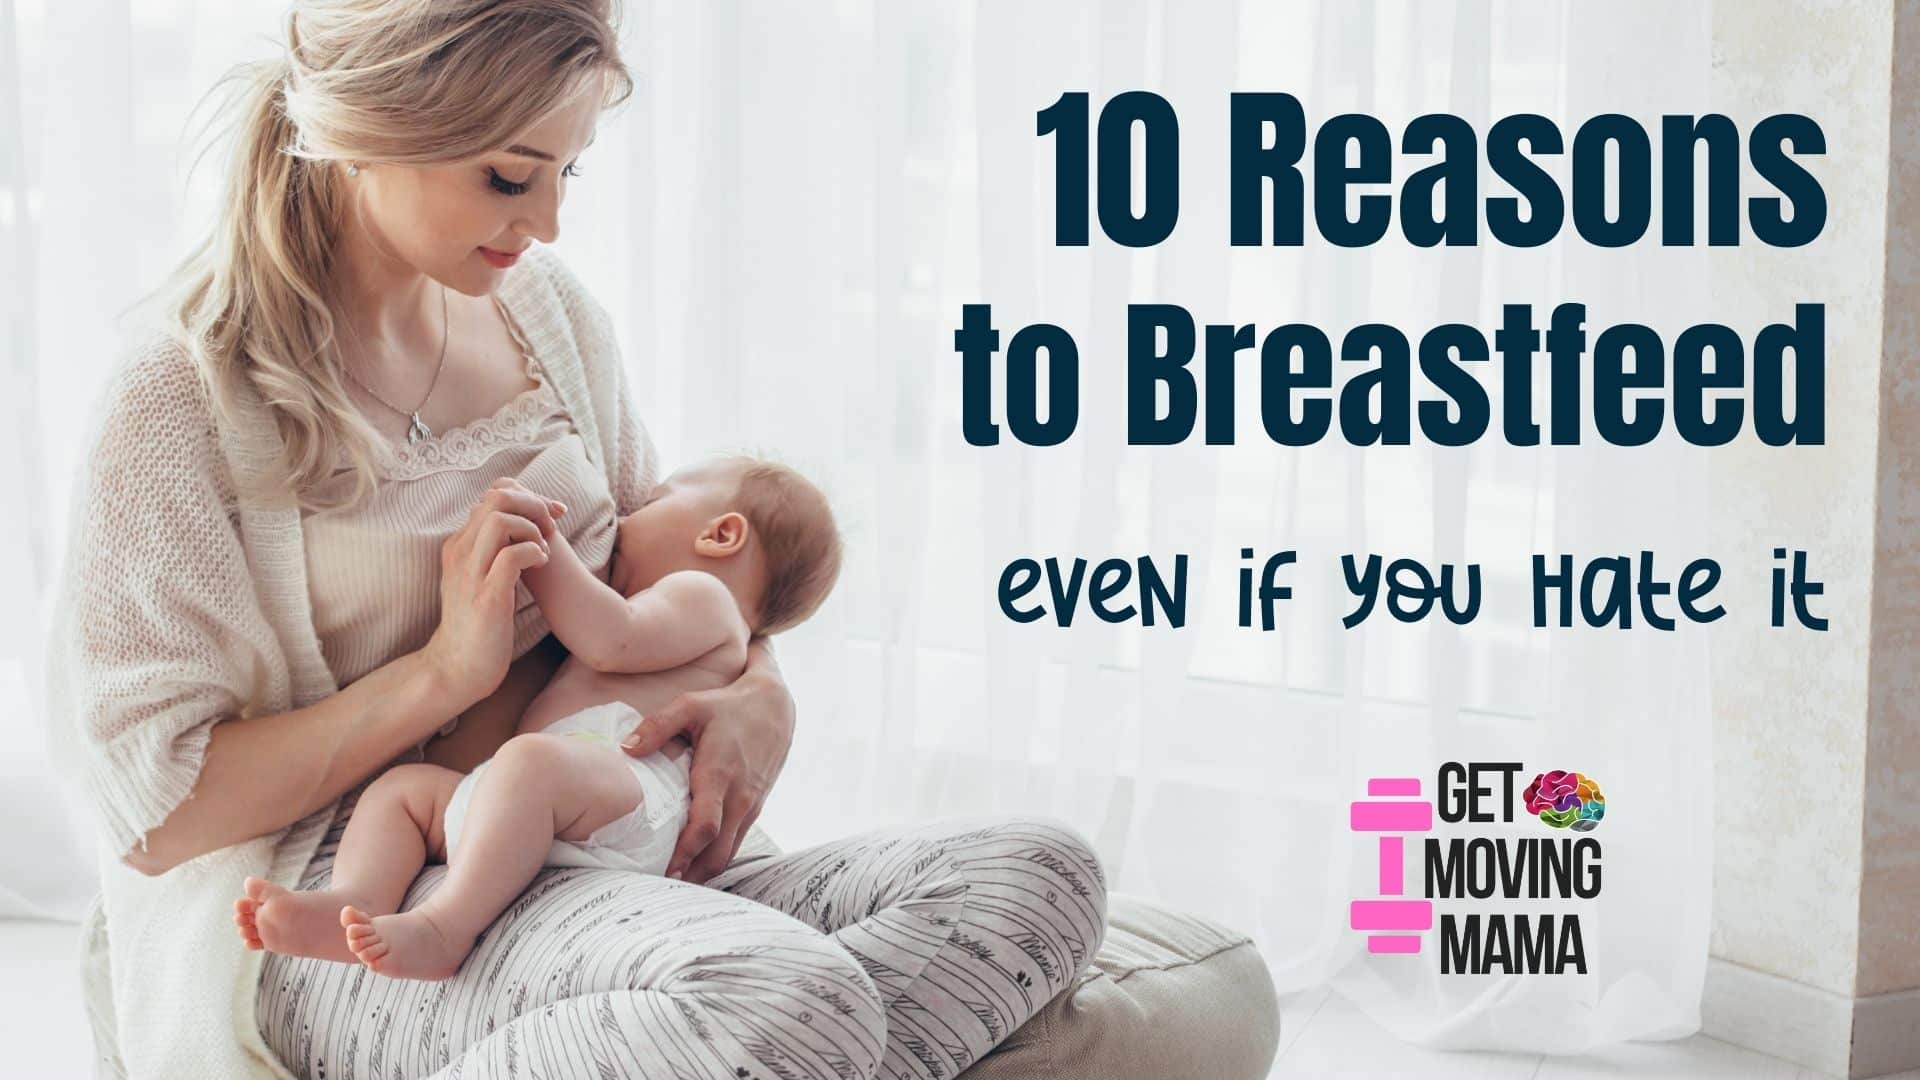 10 Reasons to Breastfeed Even If I Hate it